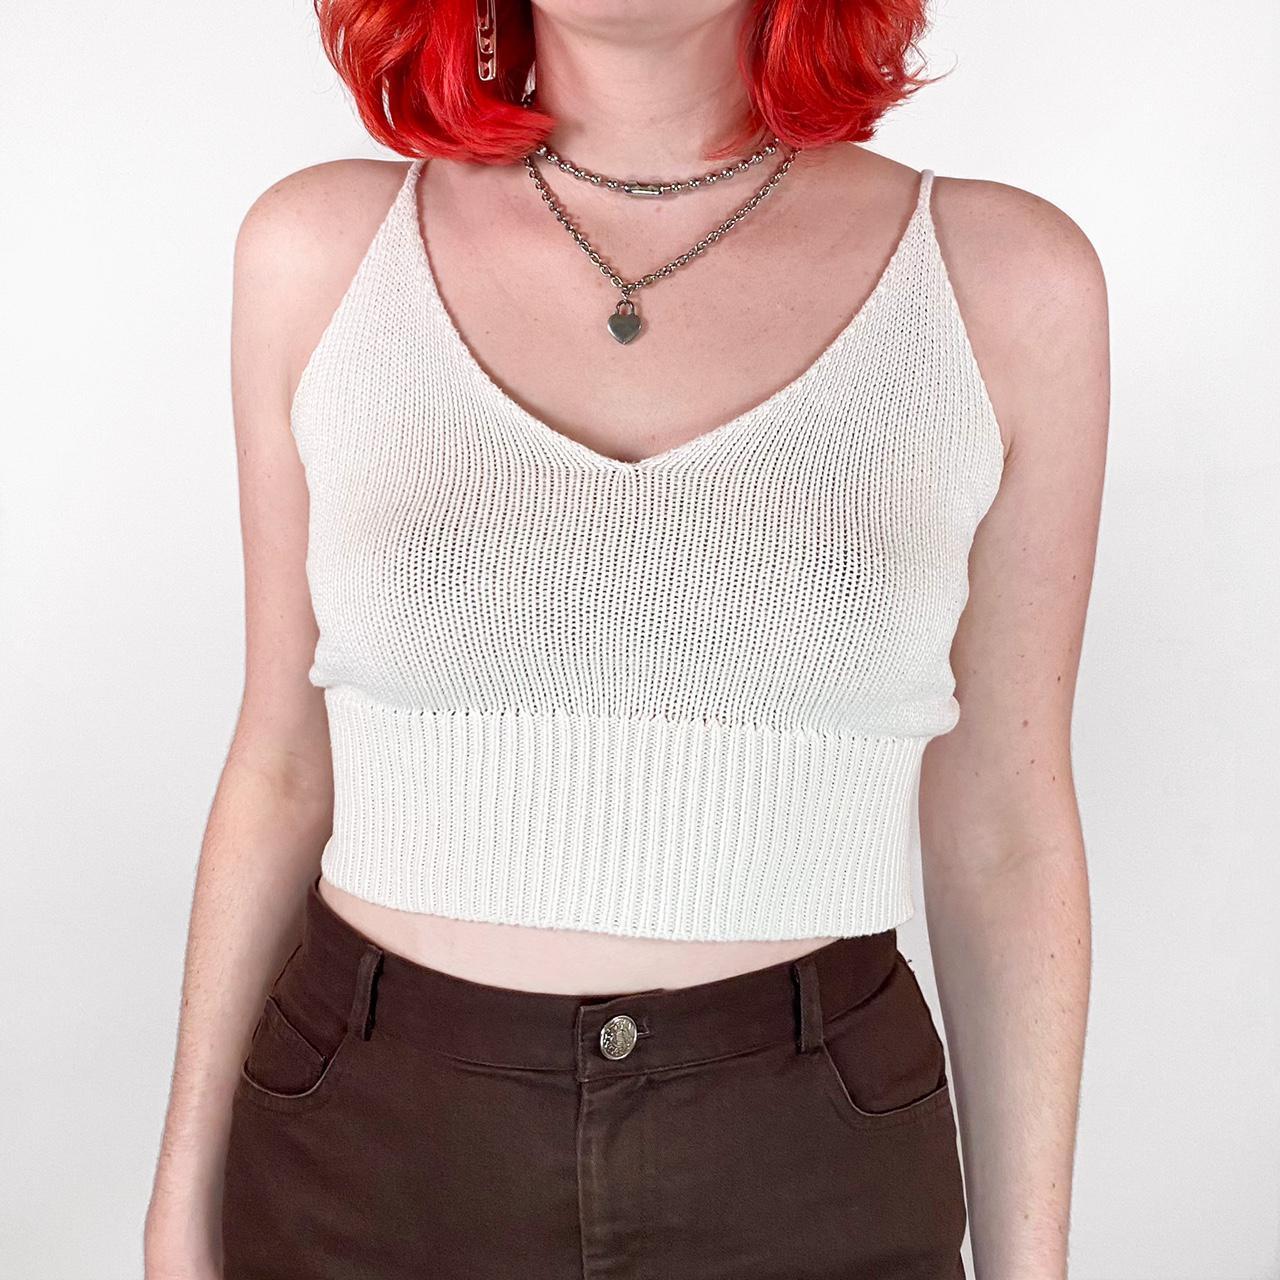 Product Image 2 - ♡ White knit tank top.